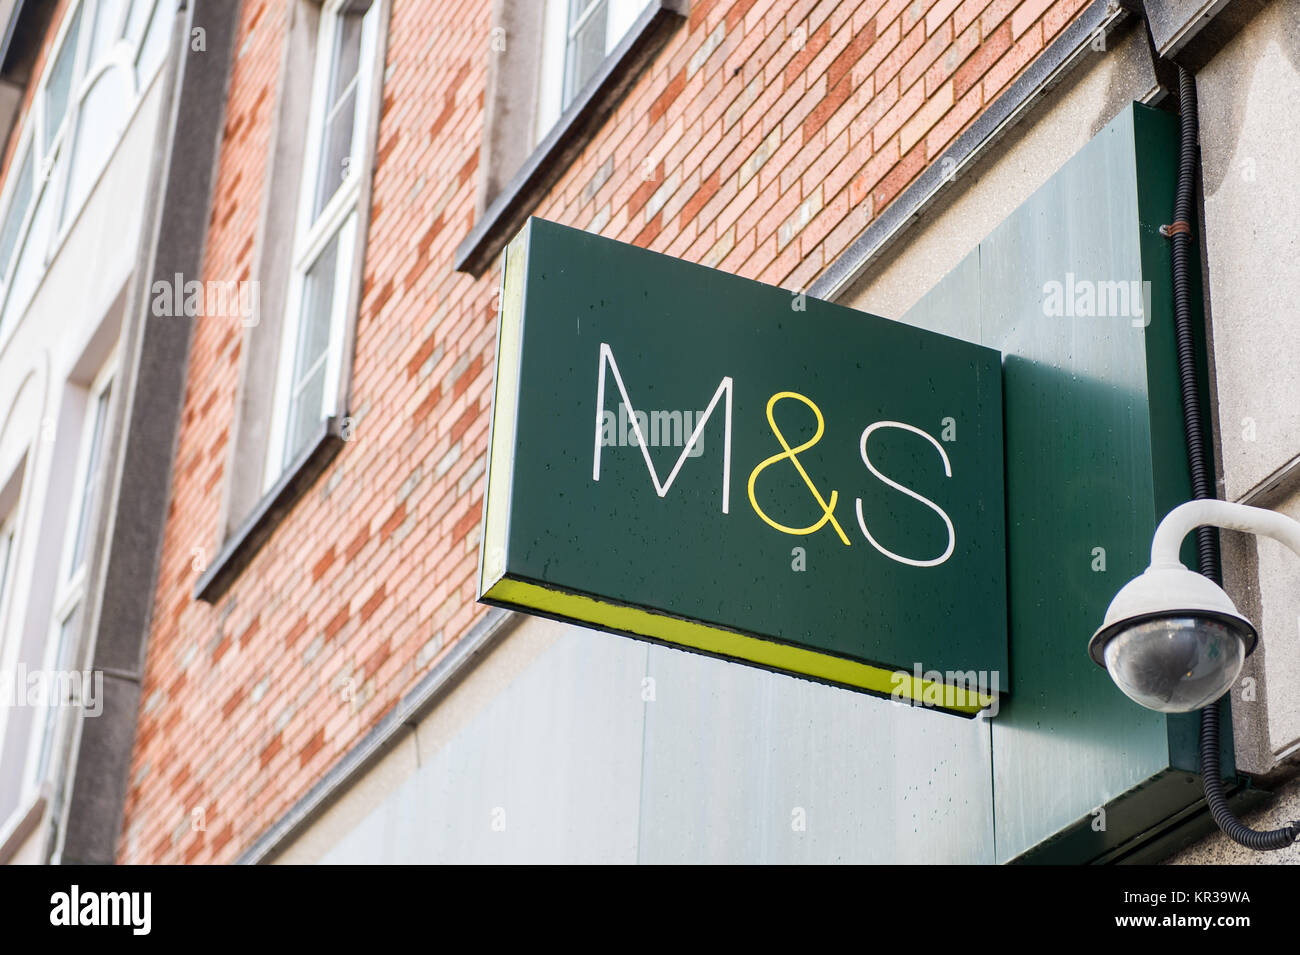 Marks & Spencer sign on a wall in Cork, Ireland with a CCTV camera and copy space. Stock Photo